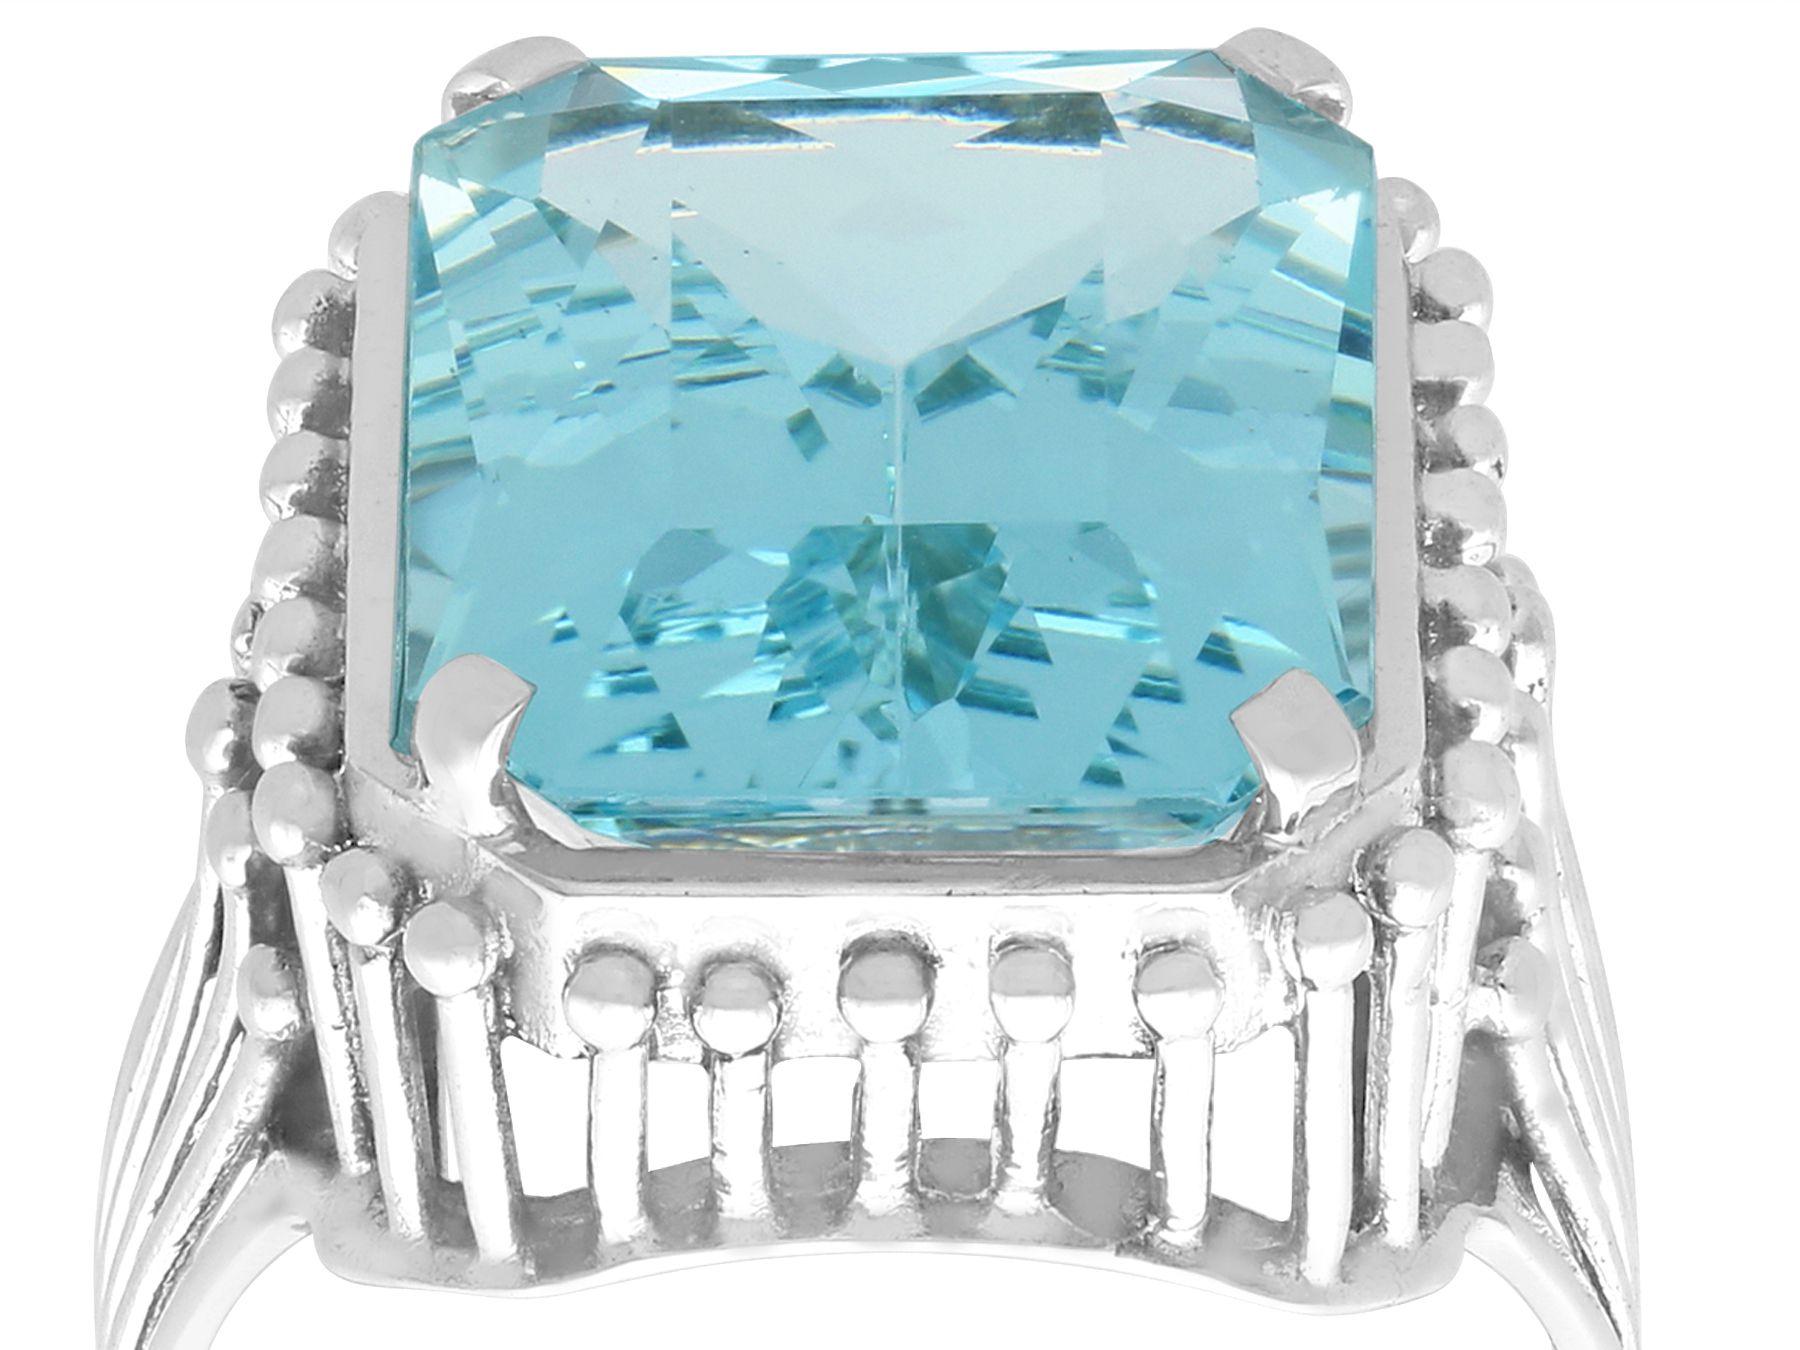 A stunning vintage 1950s 11.81 carat aquamarine and platinum cocktail ring; part of our diverse gemstone jewelry and estate jewelry collections

This stunning, fine and impressive vintage emerald cut aquamarine ring has been crafted in